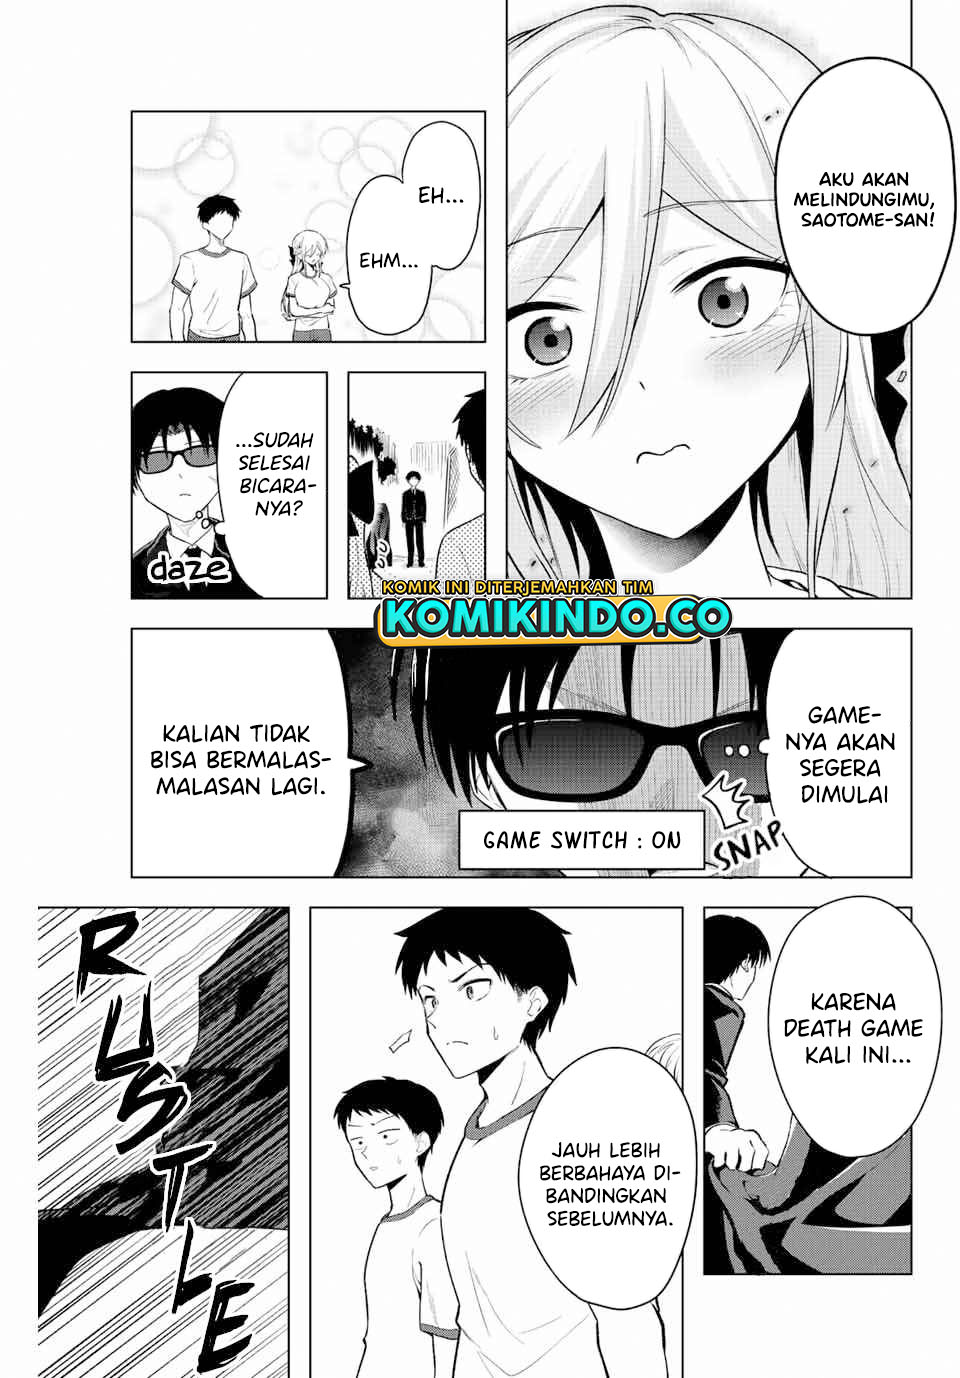 The Death Game Is All That Saotome-San Has Left Chapter 10 - 101